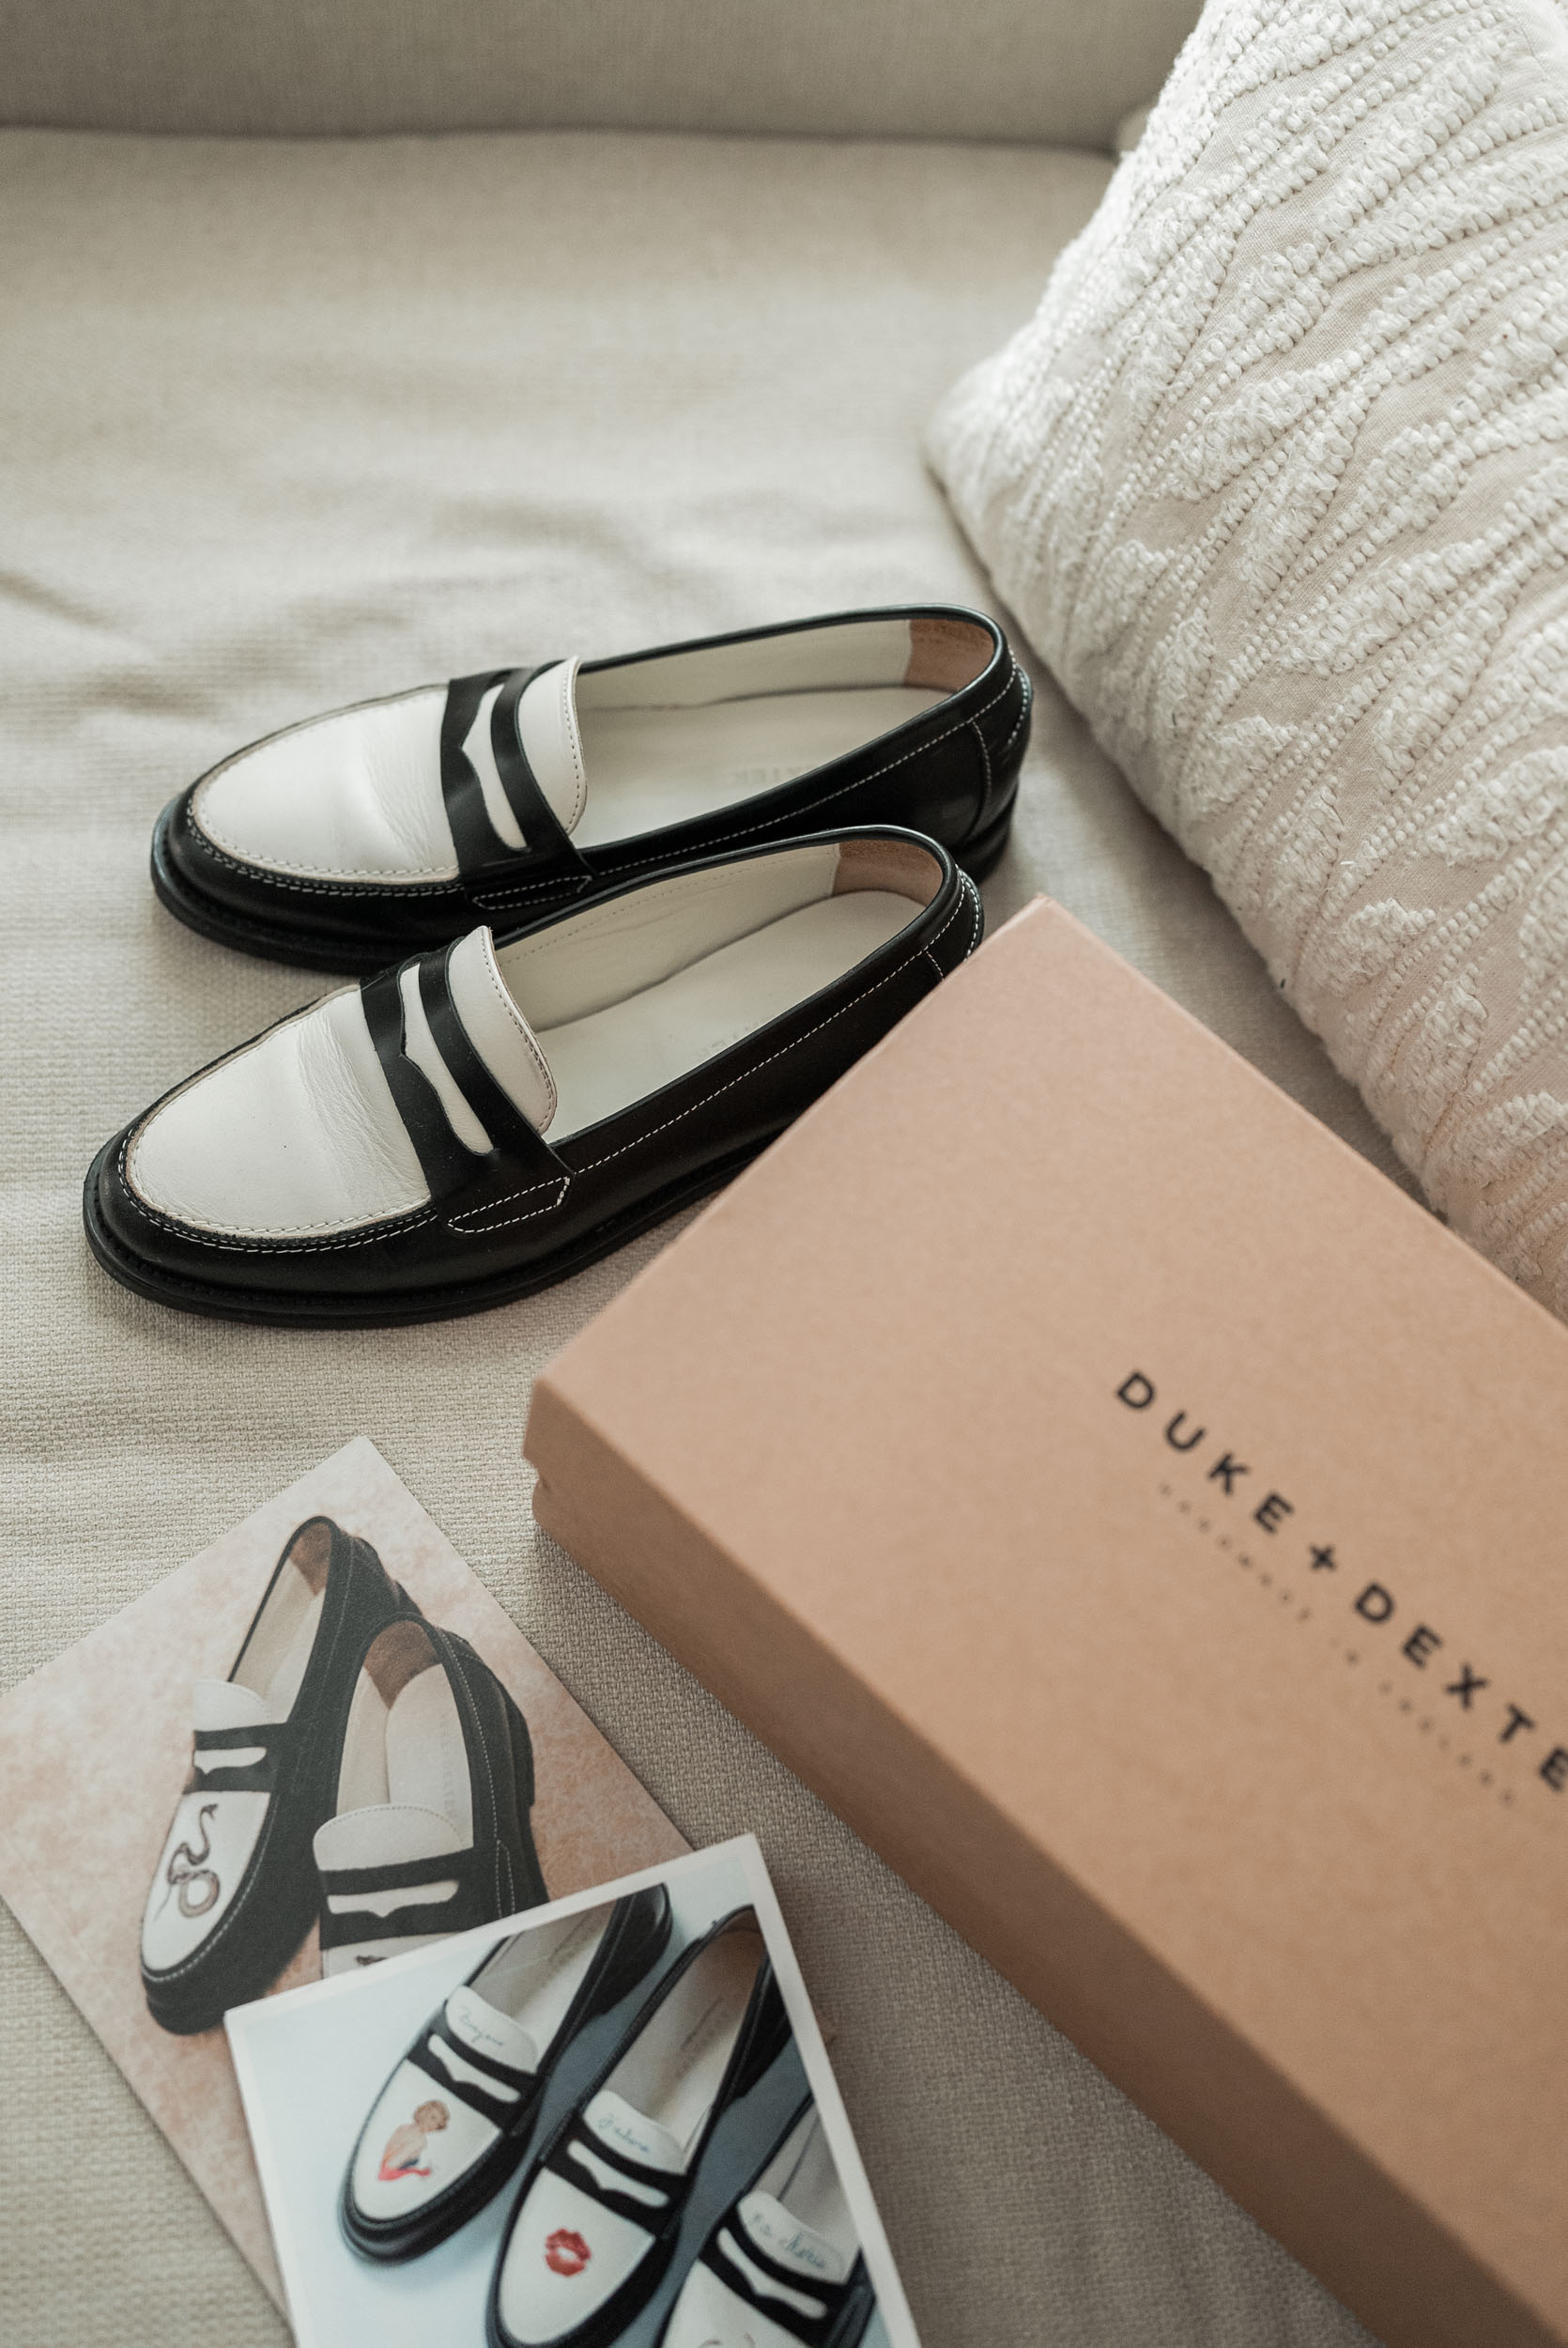 Style and Senses Duke + Dexter Wilde Penny two tone black and white loafer review An Trieu 